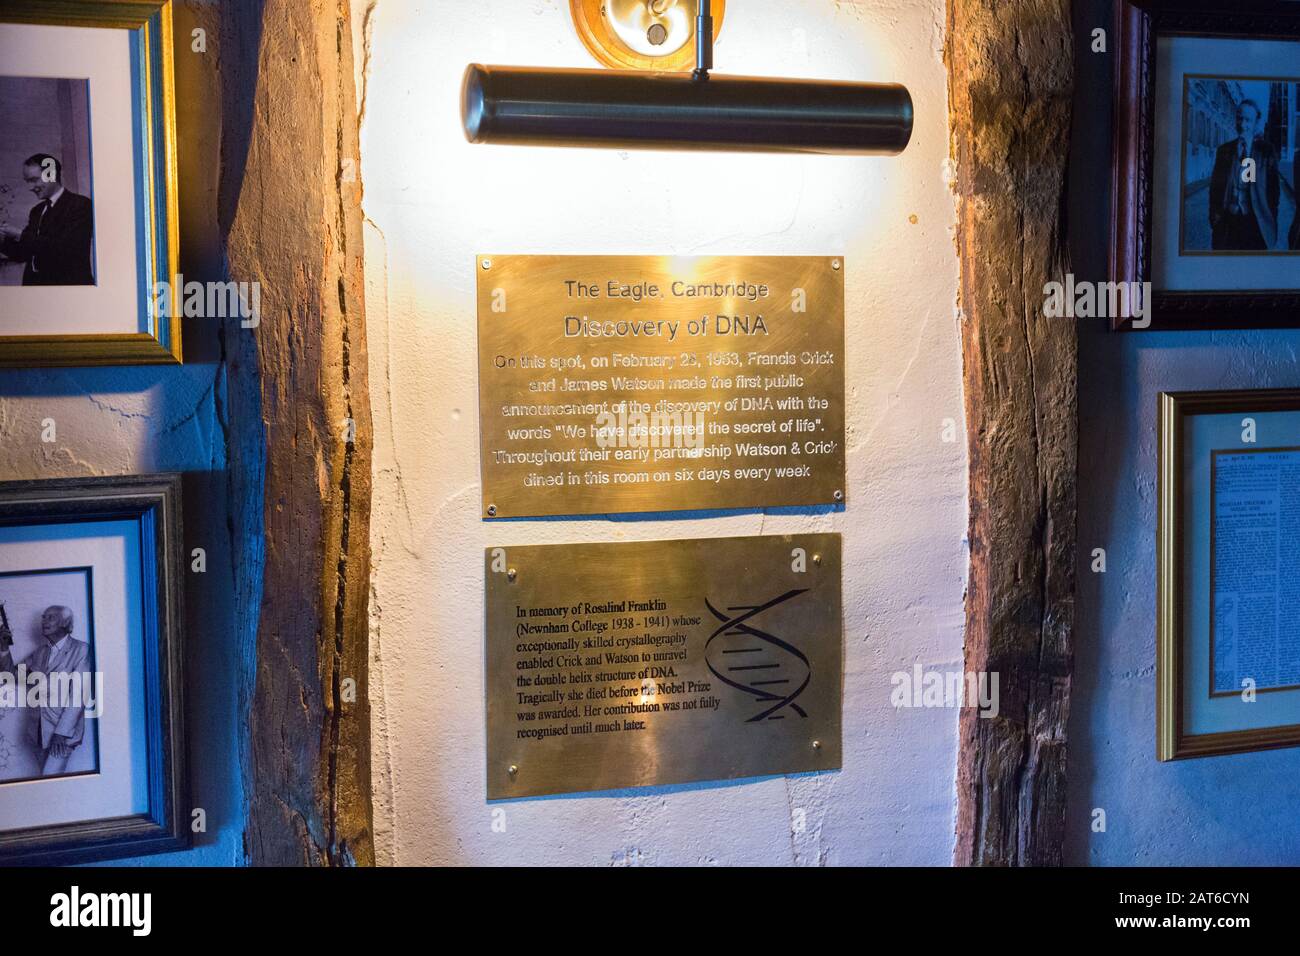 plaque commemorating the discovery of DNA by Francis Crick & James Watson inside the The Eagle Cambridge Stock Photo